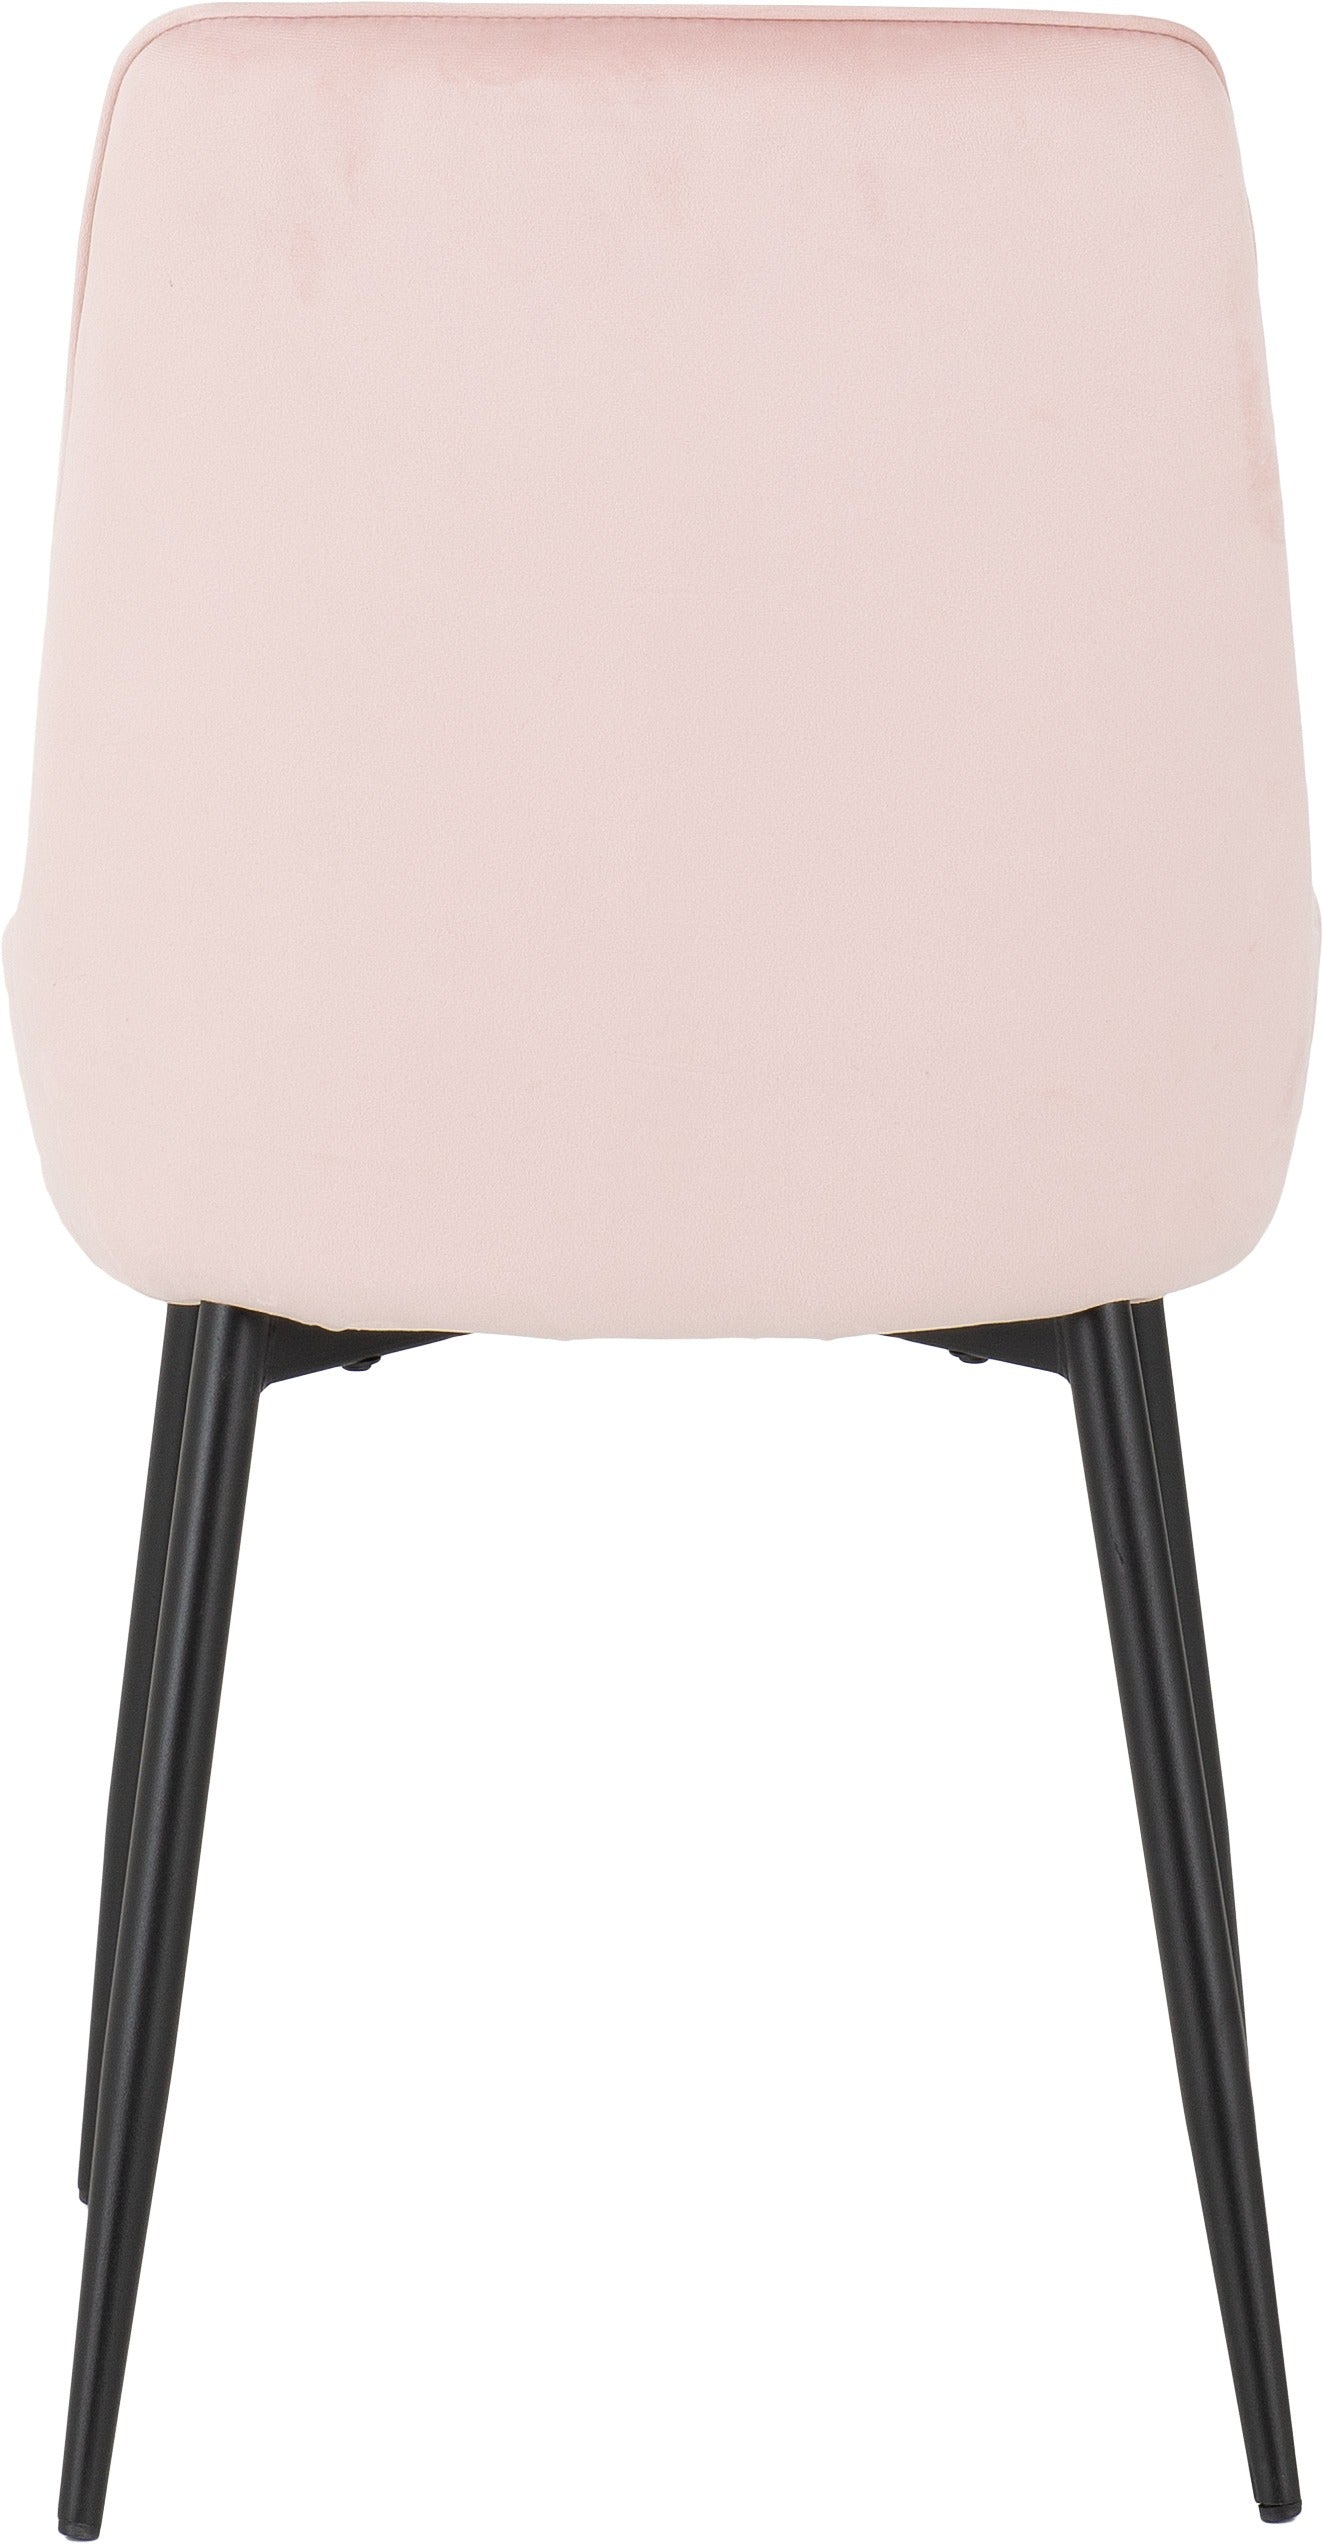 Avery Chairs Baby Pink Velvet - The Right Buy Store